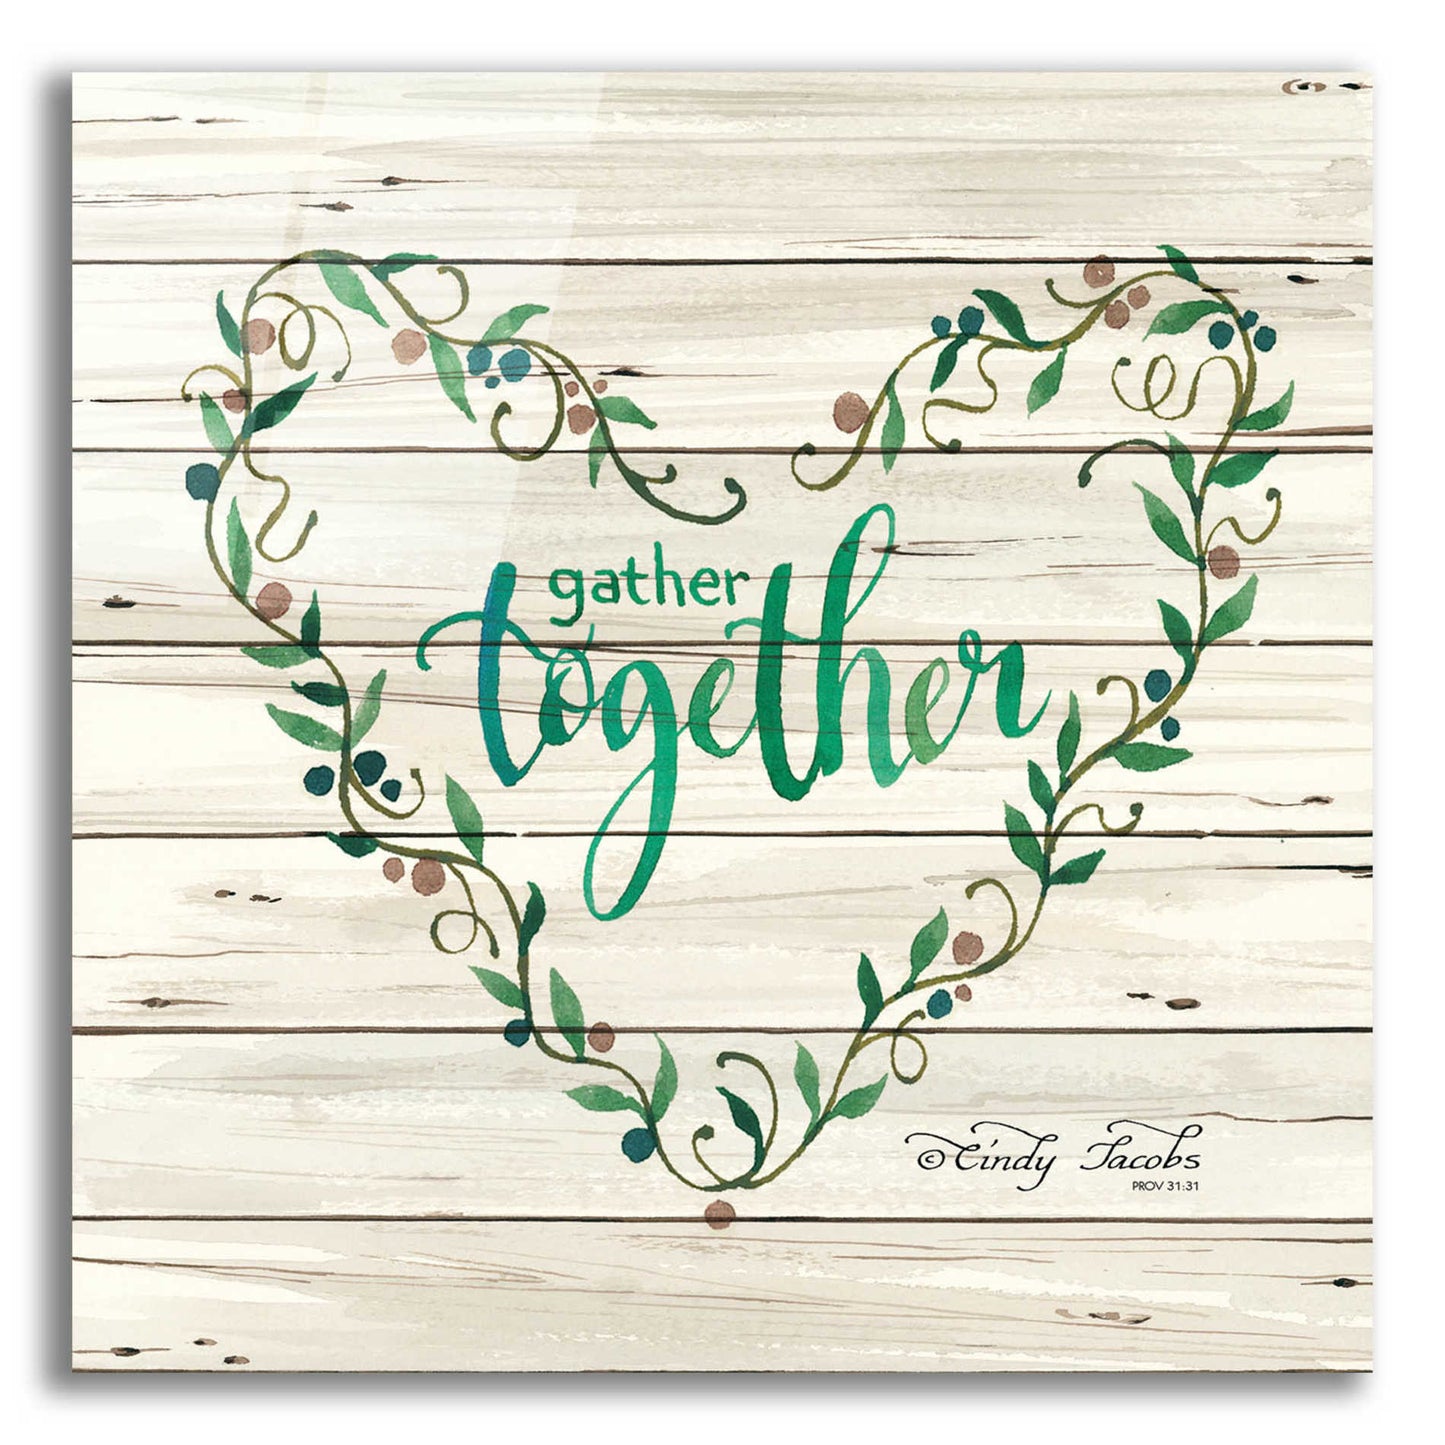 Epic Art 'Gather Together Heart Wreath' by Cindy Jacobs, Acrylic Glass Wall Art